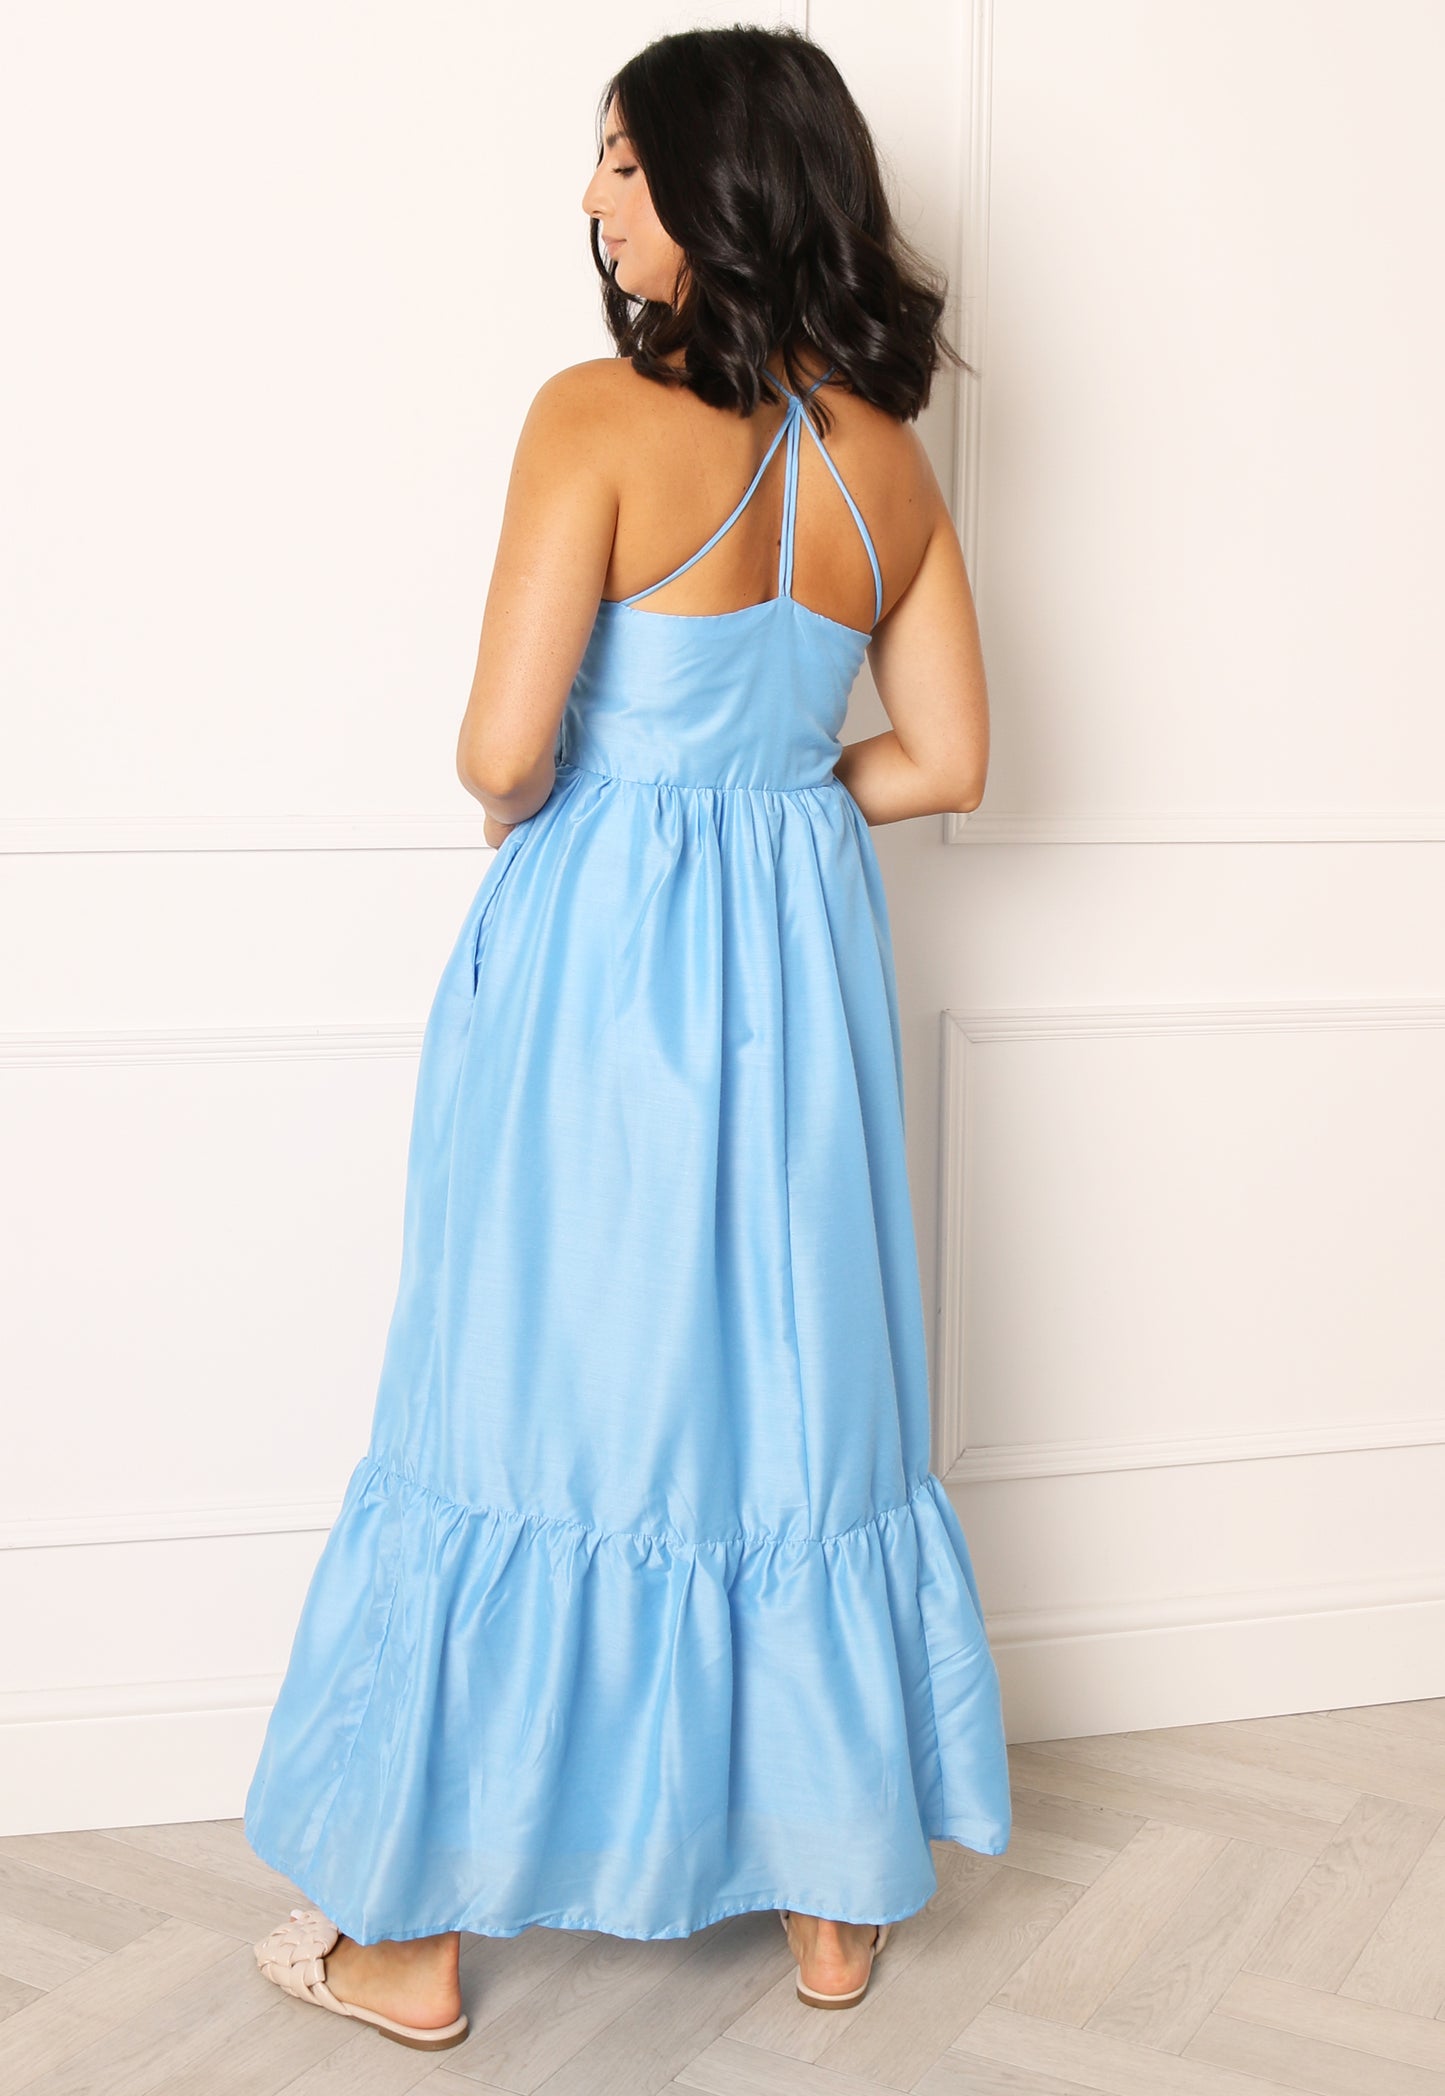 ONLY Monika Strappy Back Floaty in Nation Blue | Dress Dress ONLY Floaty Clothing Strappy Maxi in Monika Maxi Blue Back One